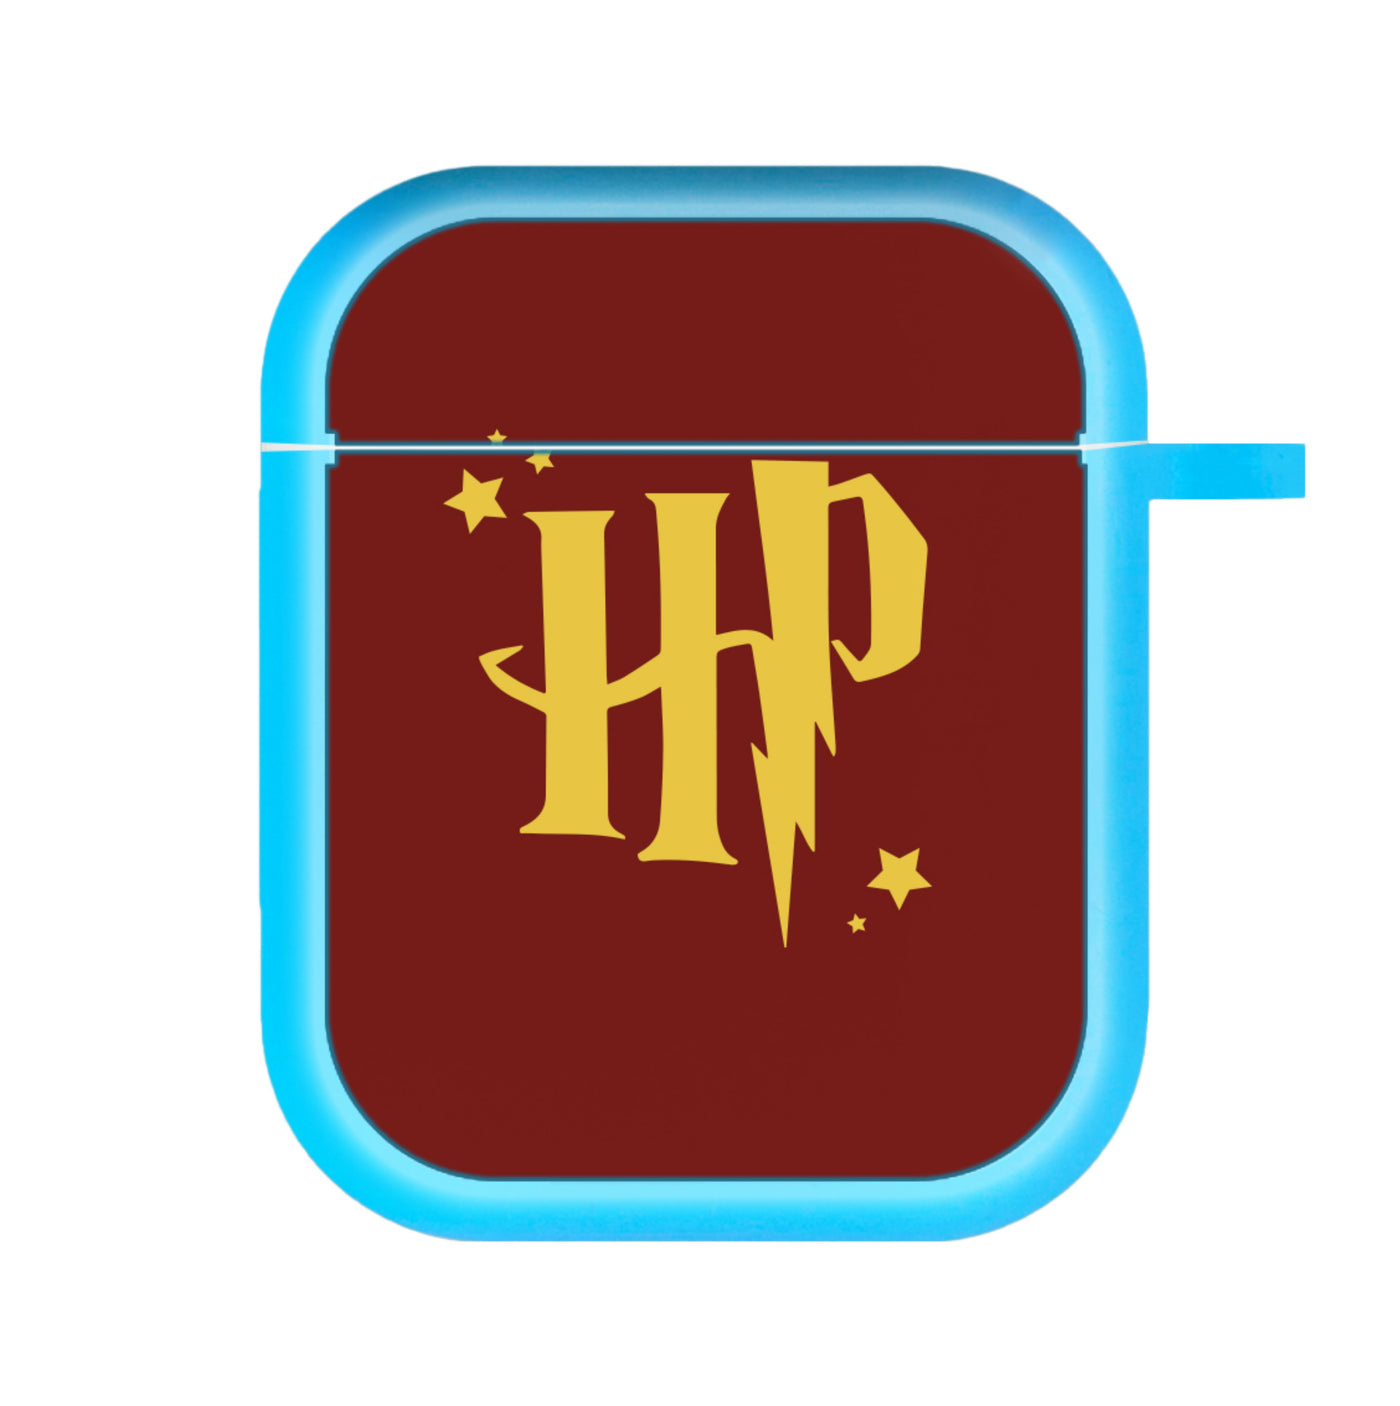 HP - Harry Potter AirPods Case